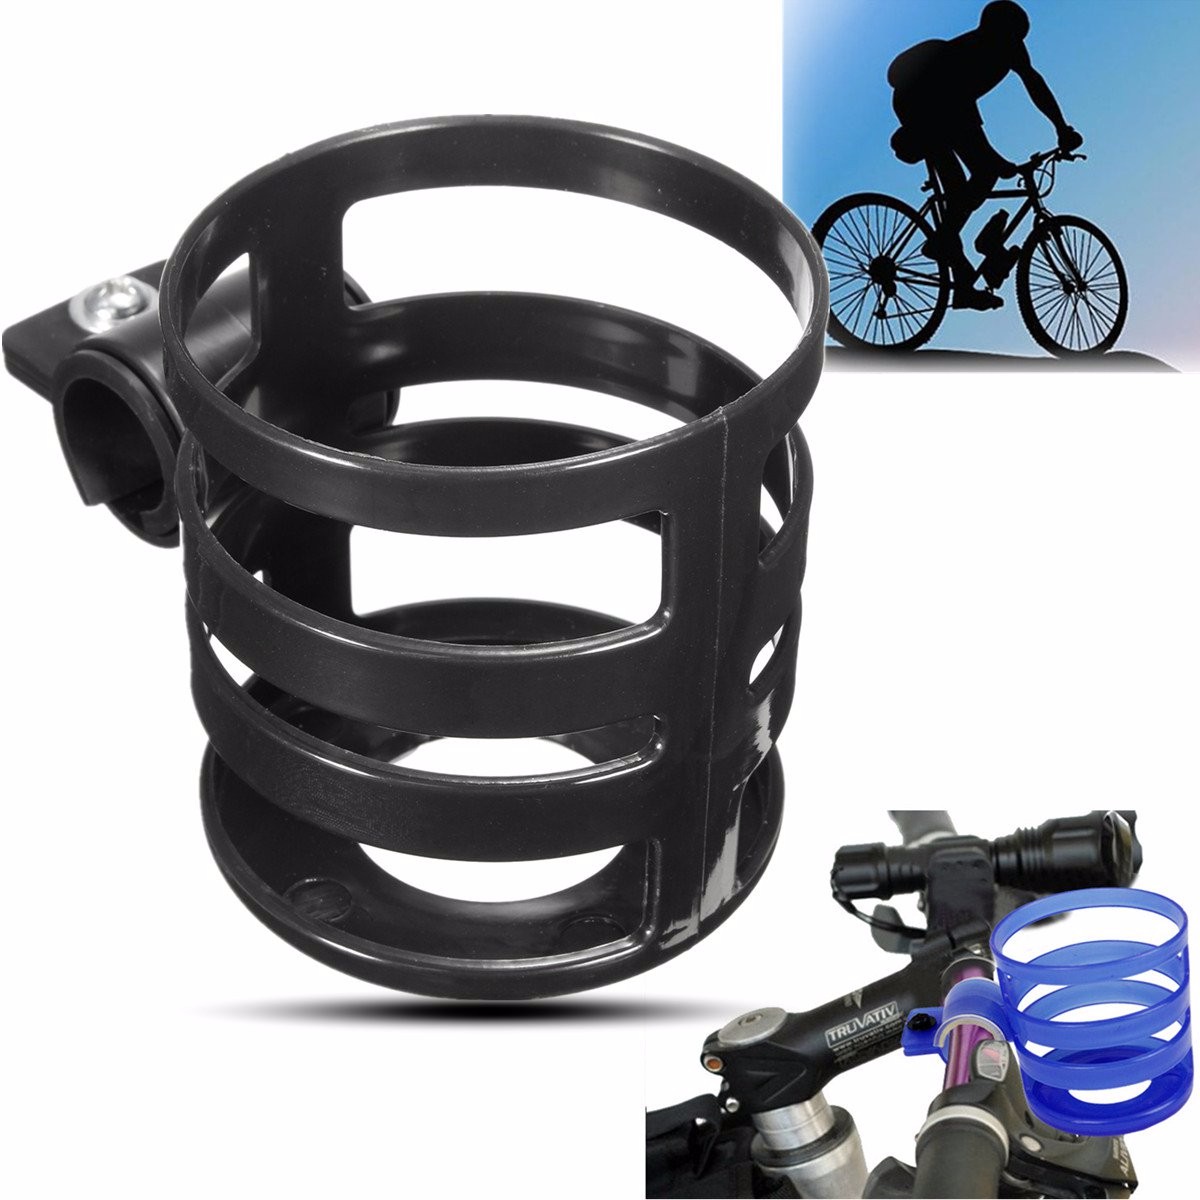 Durable X4O1 Bike Bicycle Plastic Water Bottle Holder Cage Rack Accessories 